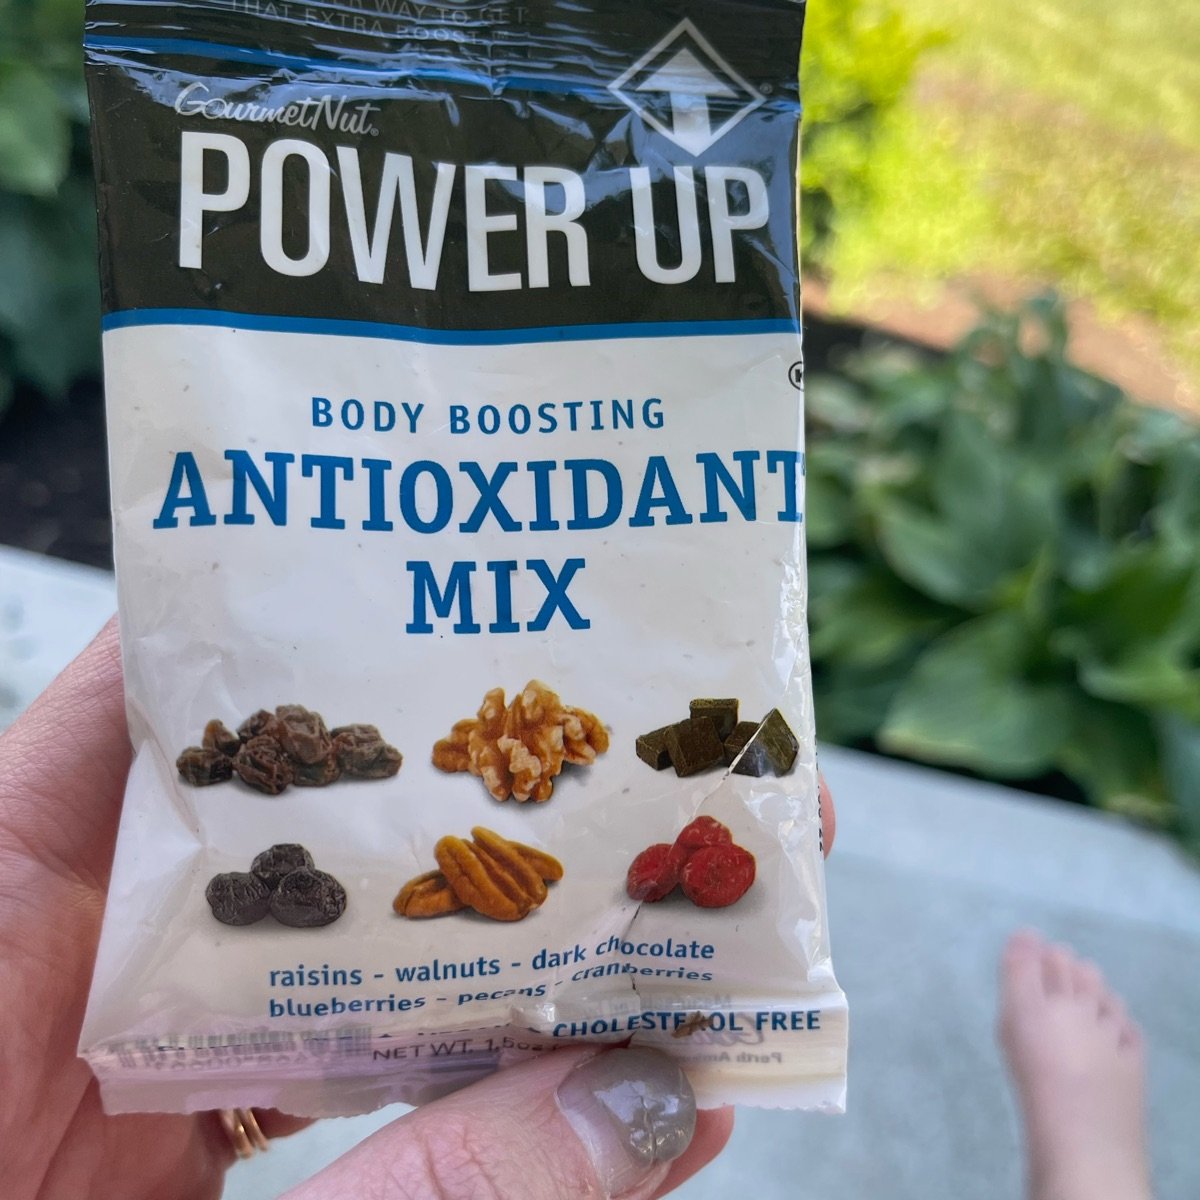 Power Up Body Boosting Antioxidant Mix Reviews | abillion